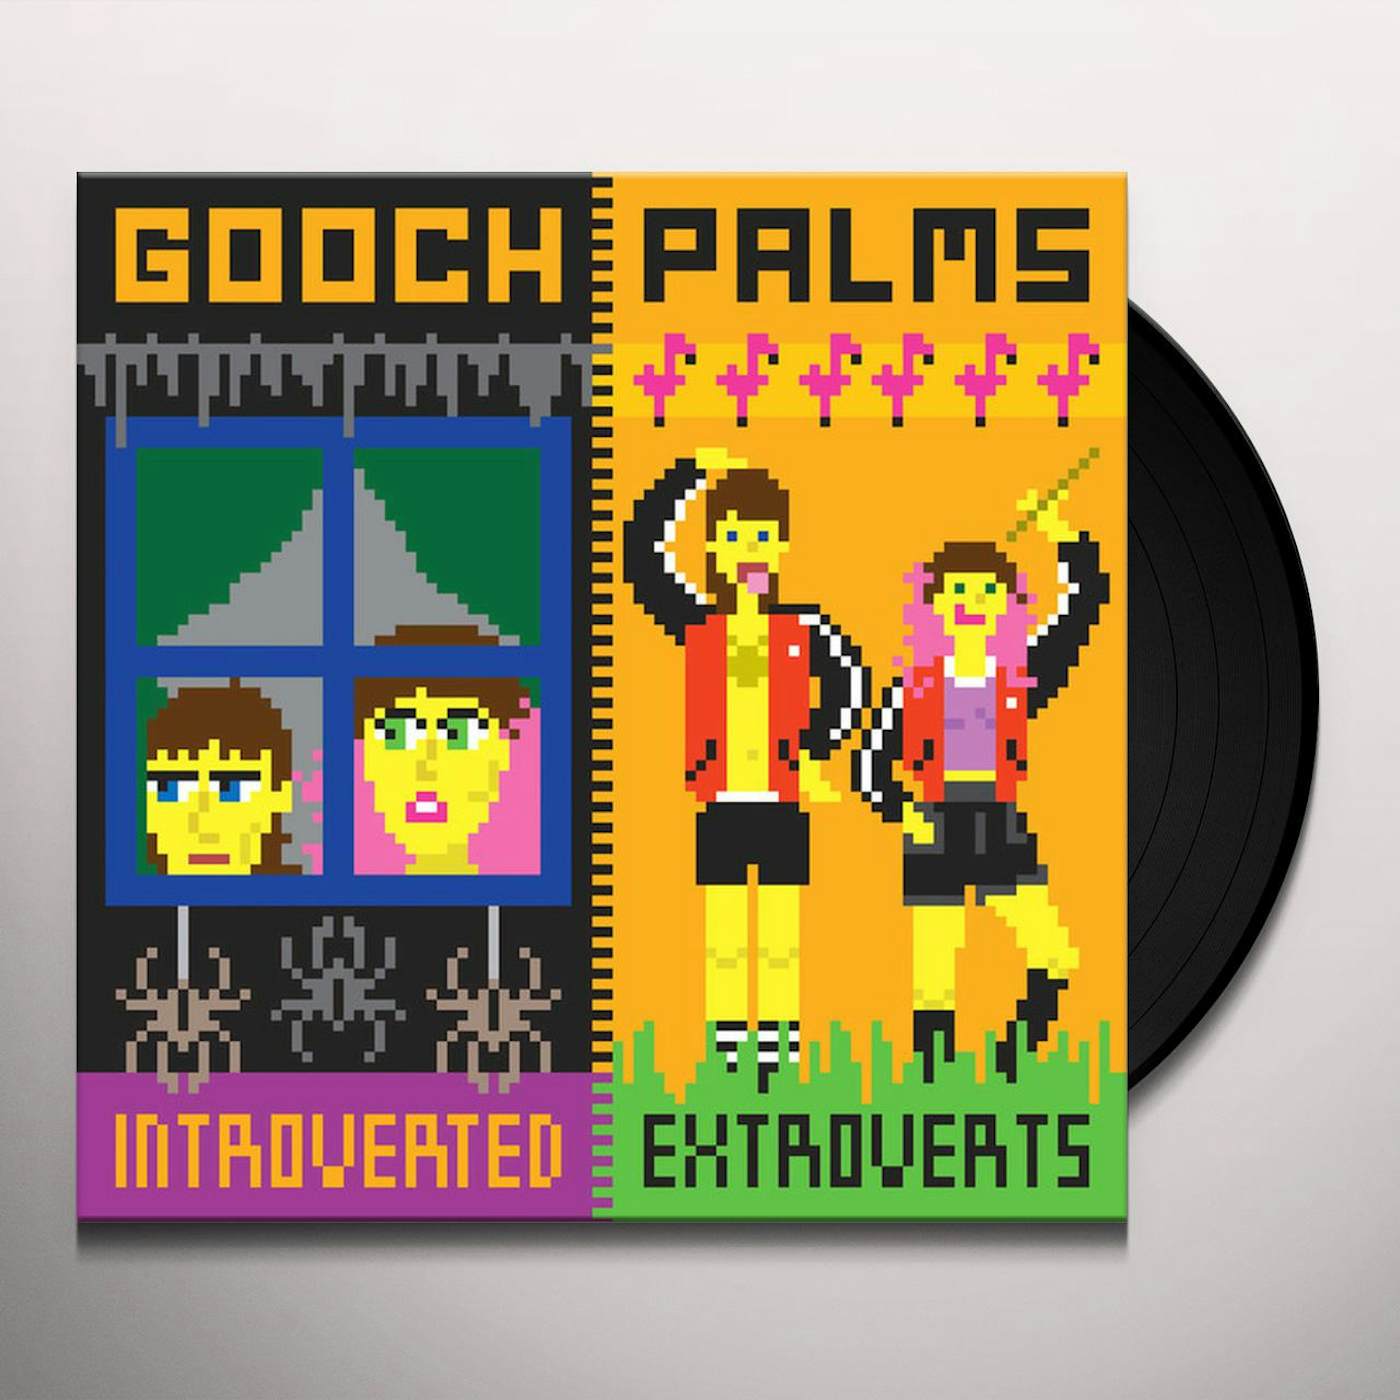 The Gooch Palms Introverted Extroverts Vinyl Record